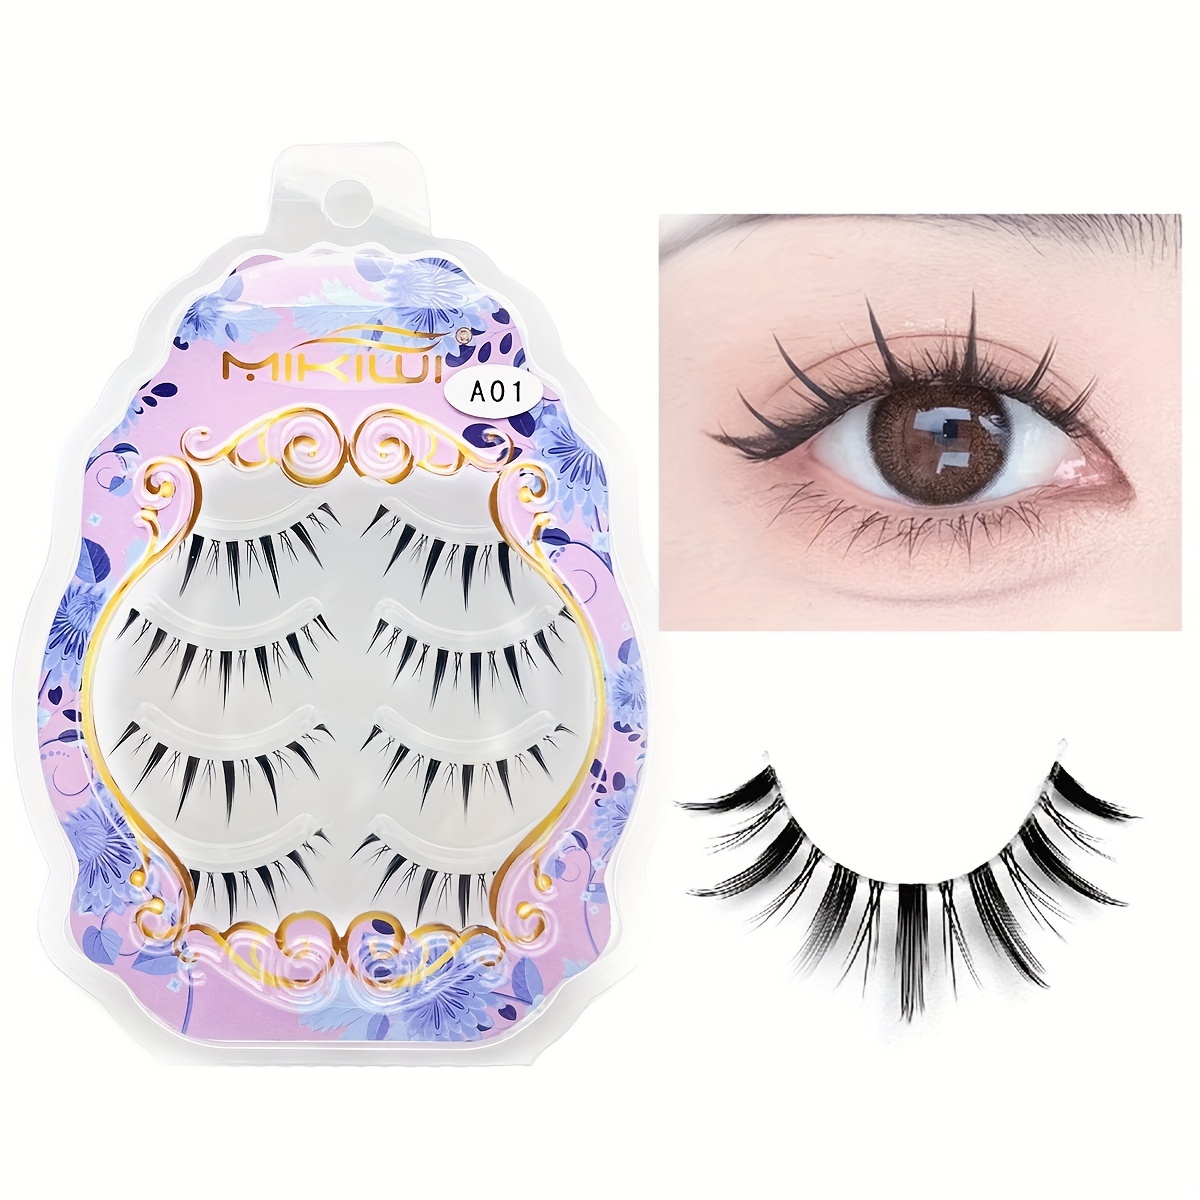 Restocked!] Anime/Manga/Korean/Uzzlang Make up/Douyin Makeup lashes  Aesthetic False Eyelashes/Eyelash Extensions for Girly Cute Make Up Style  or Cosplay/Anime cosplay *:・ﾟ✧ [10 lashes Per Box], Beauty & Personal Care,  Face, Makeup on Carousell